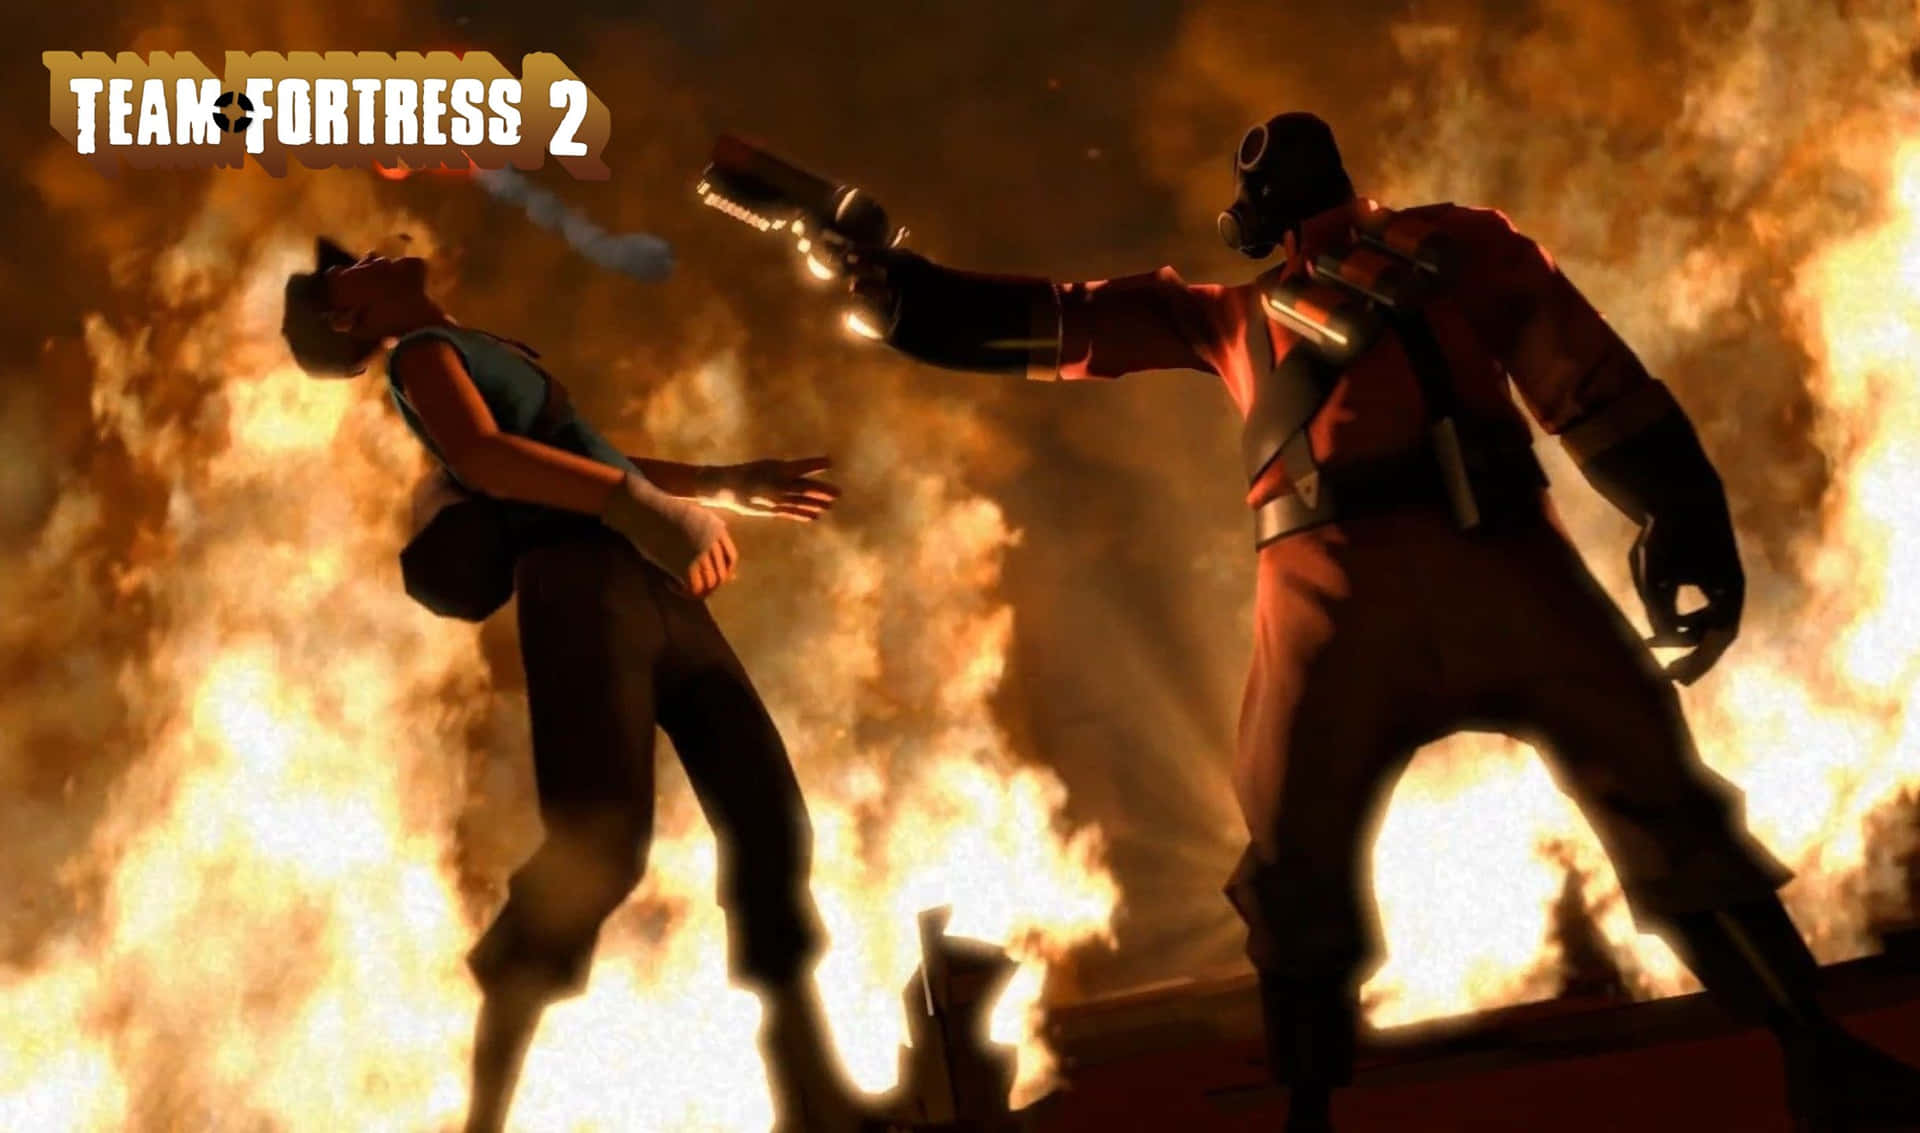 Exciting Team Fortress 2 action in a battle-ready 2440x1440 resolution